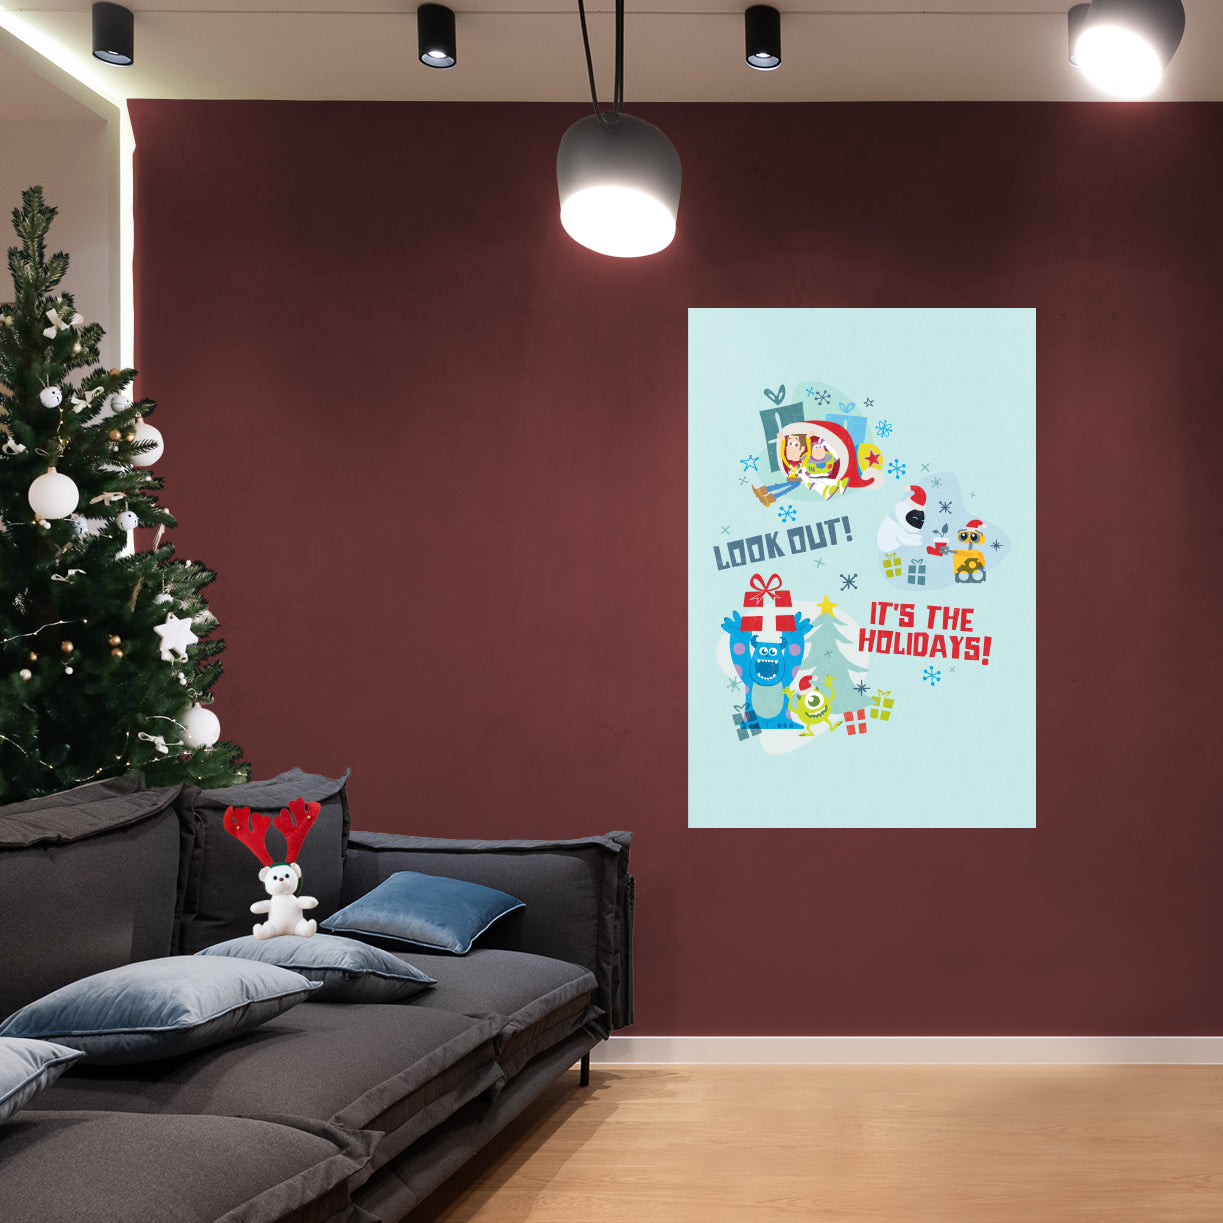 Disney Pixar Festive Cheer: Buzz, Woody, EVE, Wall-E, Mike, Sulley Look Out Mural - Officially Licensed Disney Removable Adhesive Decal